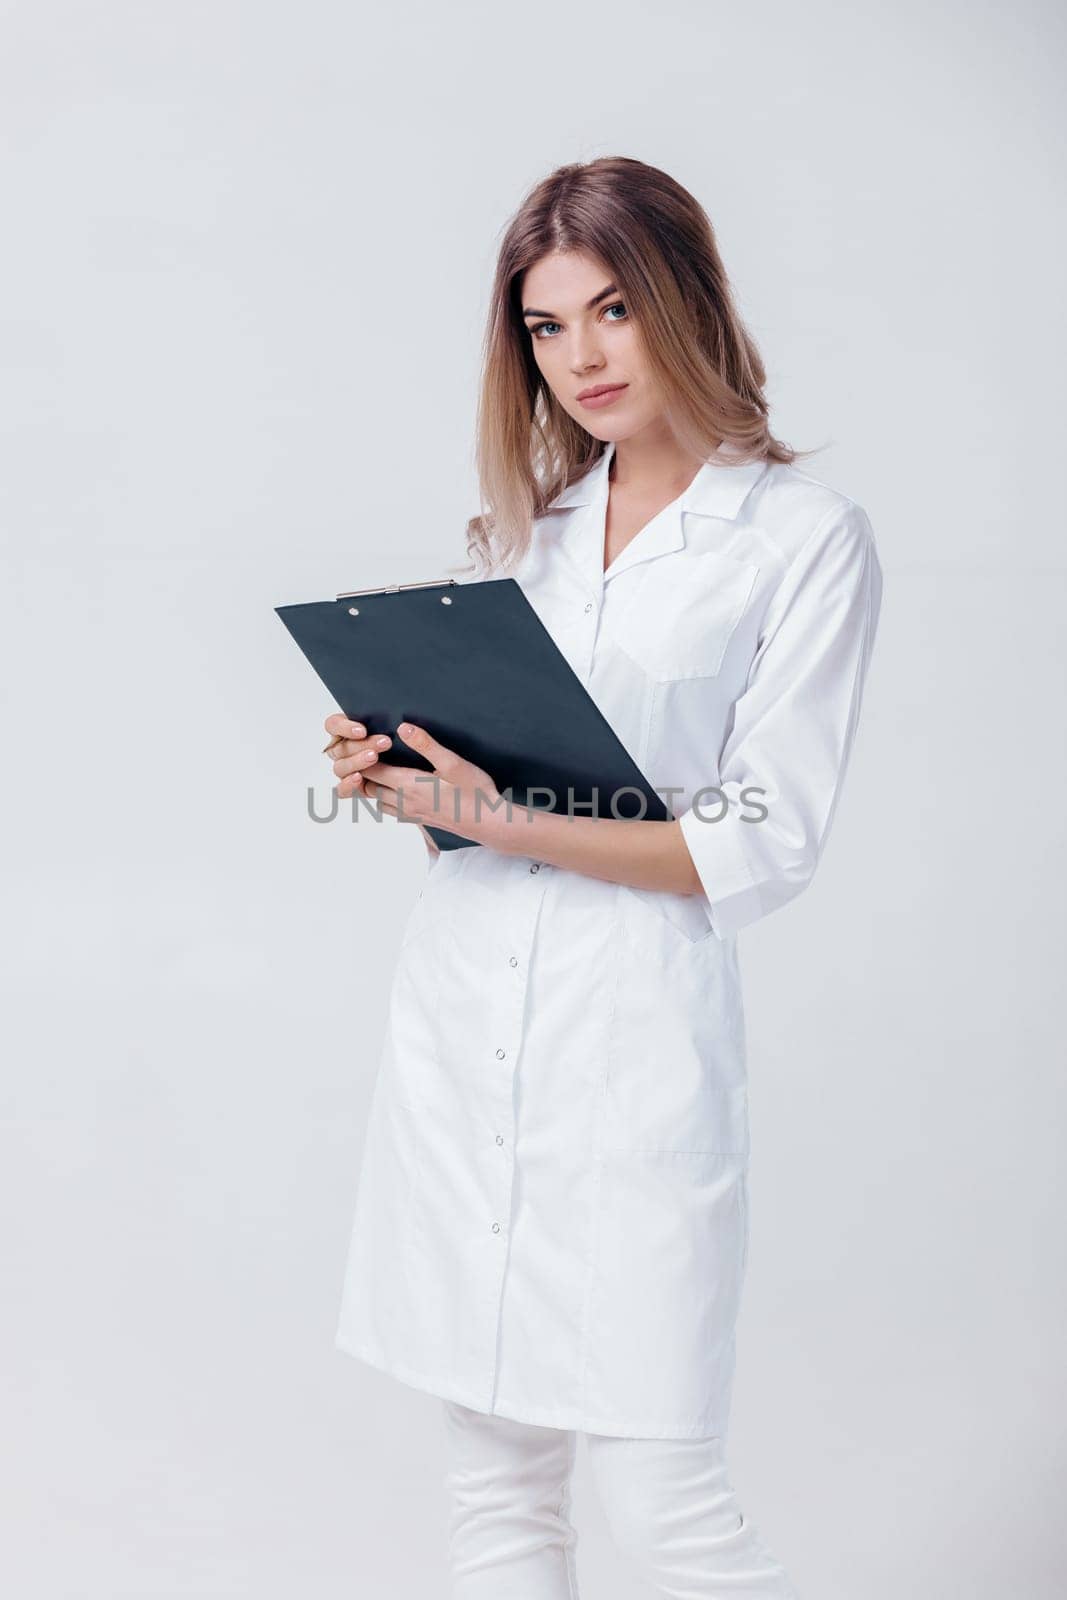 Medical physician doctor woman in white coat holds folder with documents and looks at camera on light background.